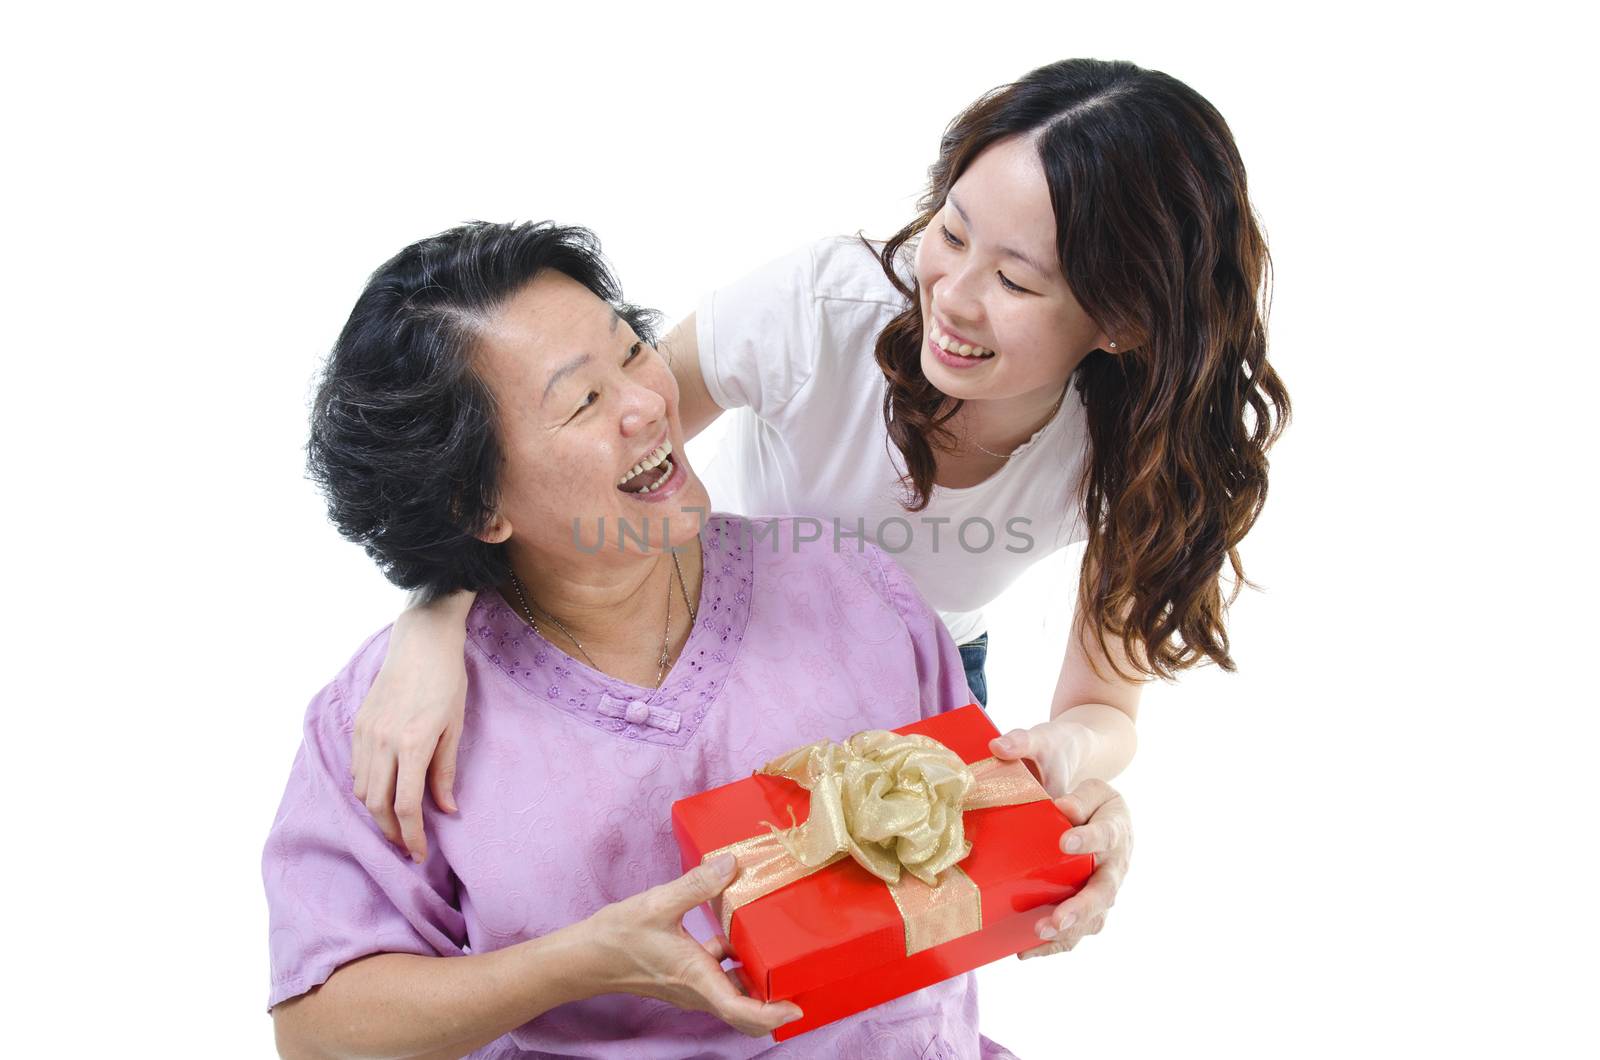 Celebrating mothers day or birthday. Portrait of Asian senior parent getting a present box from adult daughter, isolated on white background.